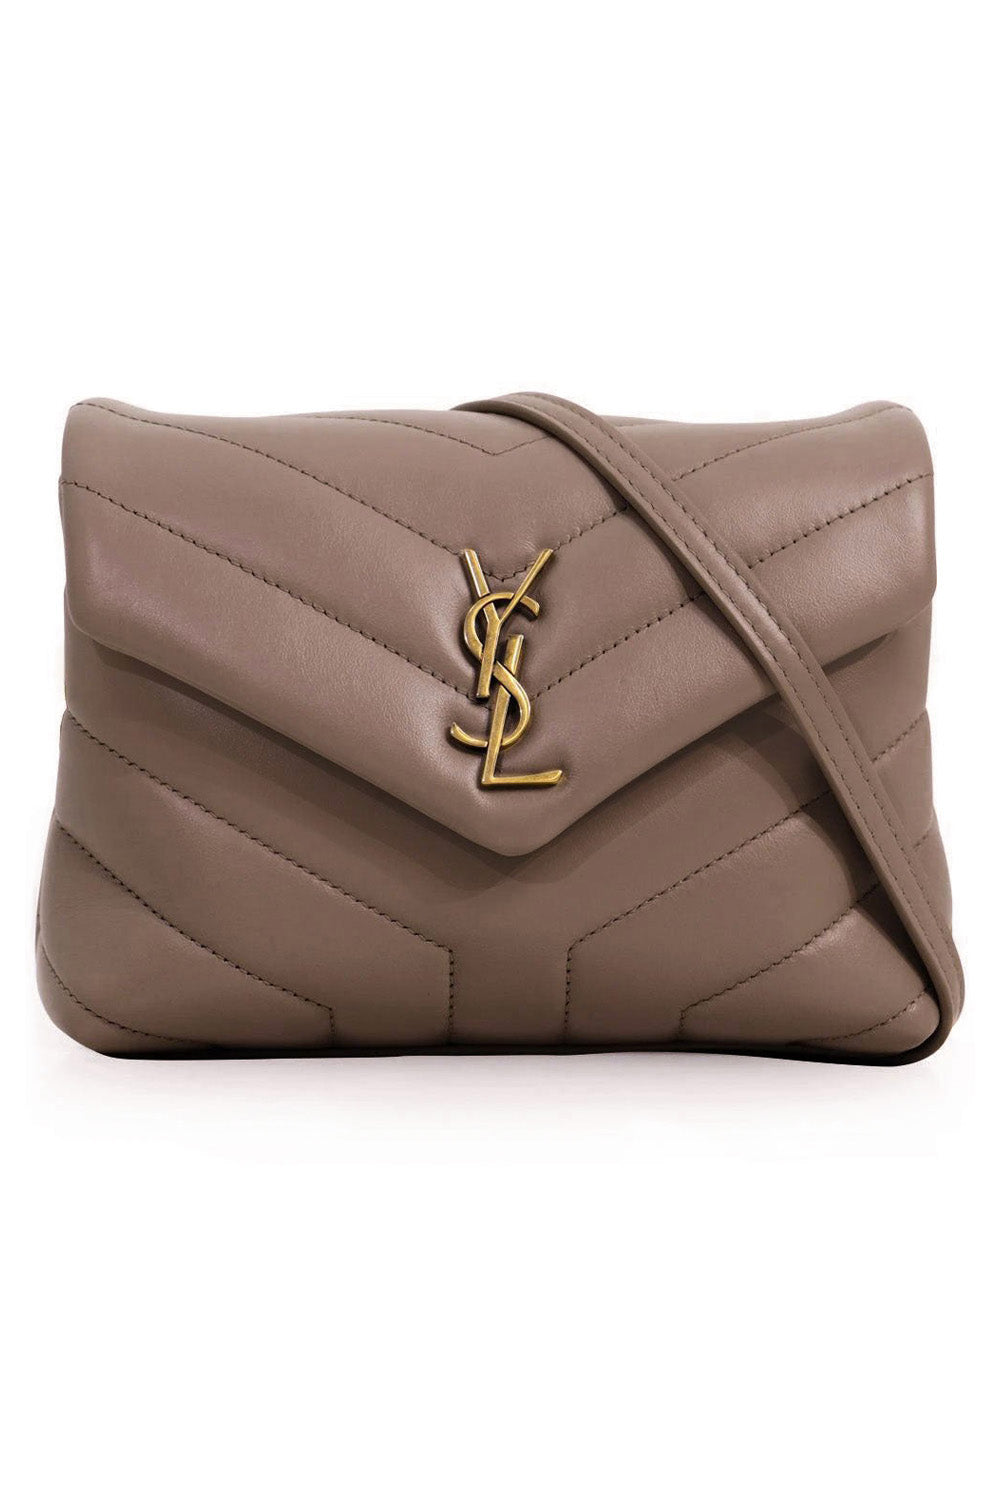 Ysl loulou large size storm grey NWT